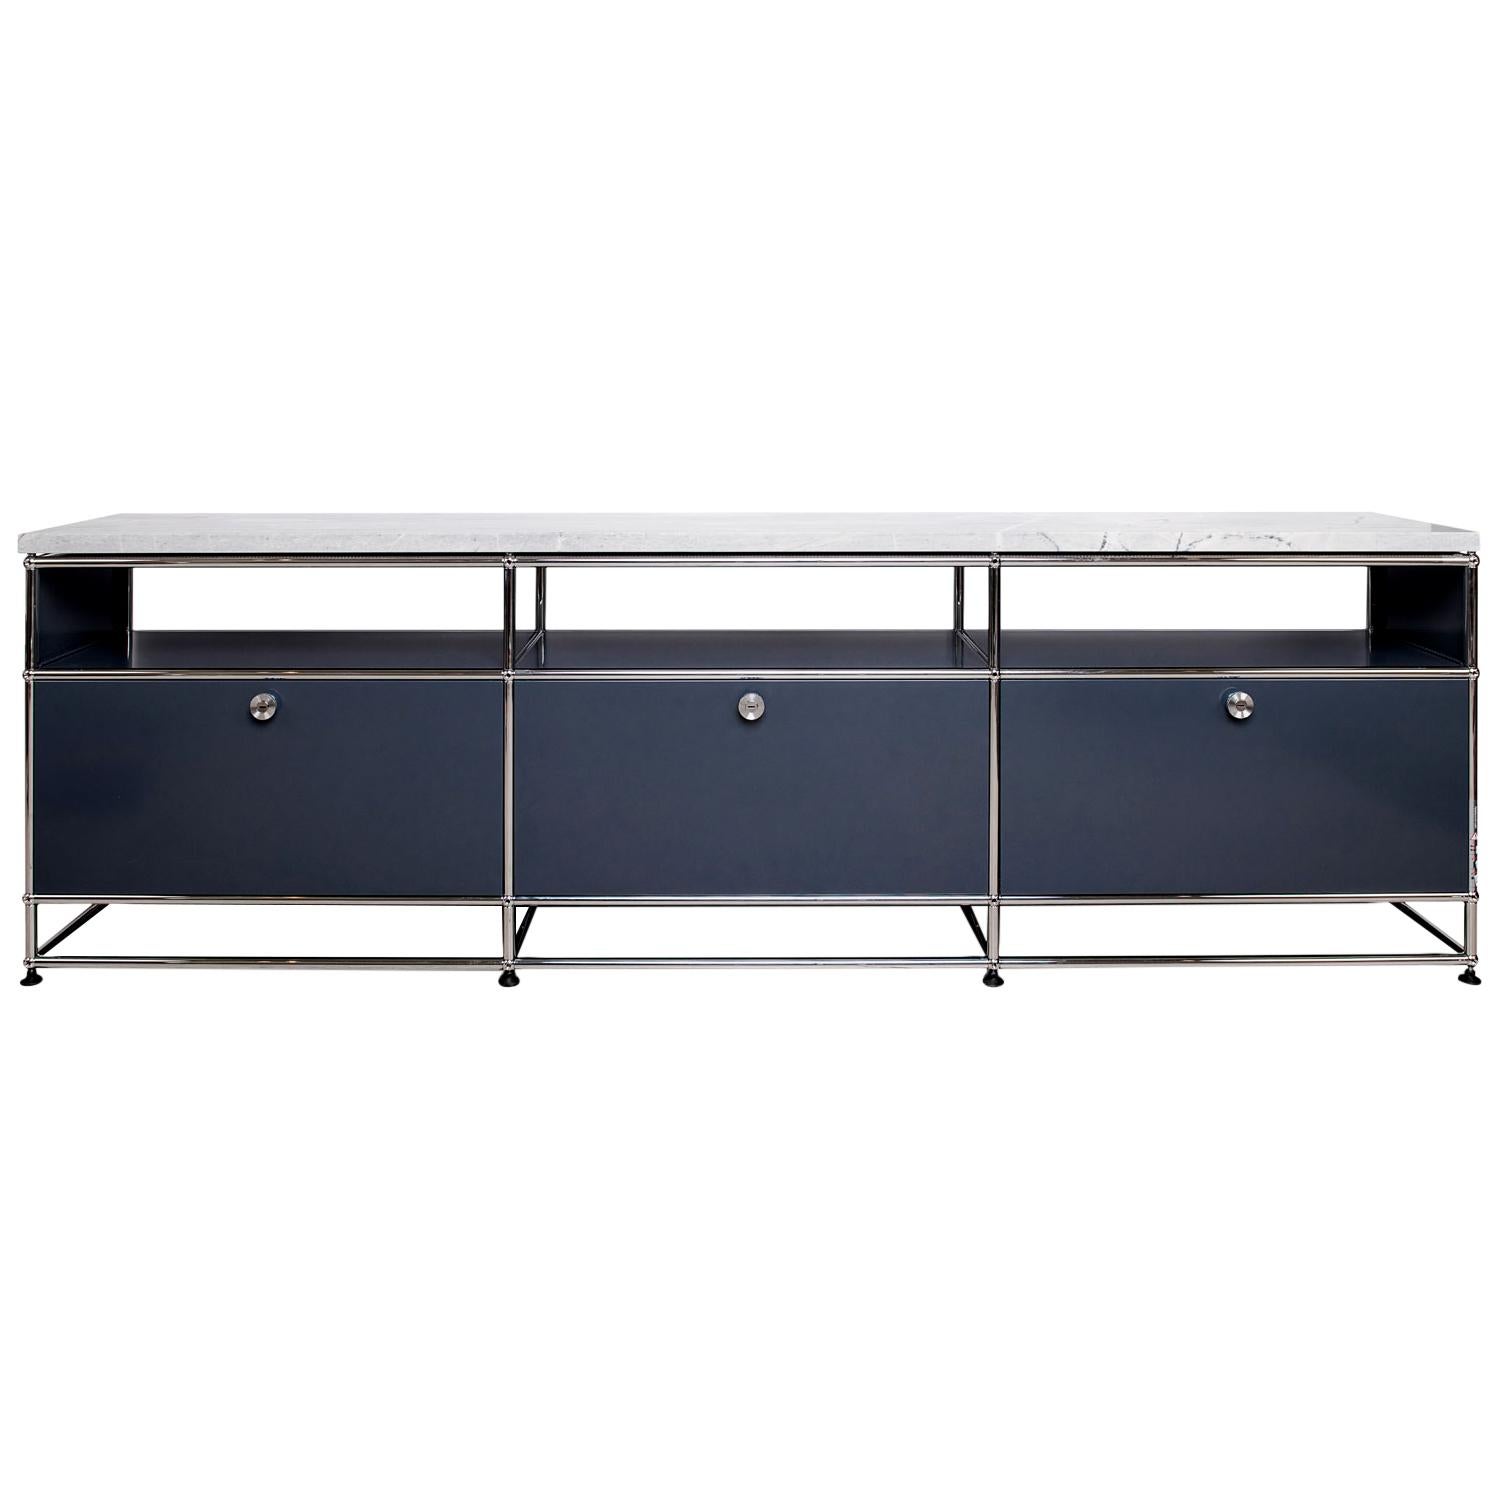 Anthricite Gray and Chrome Sideboard with Marble Top, USM Haller